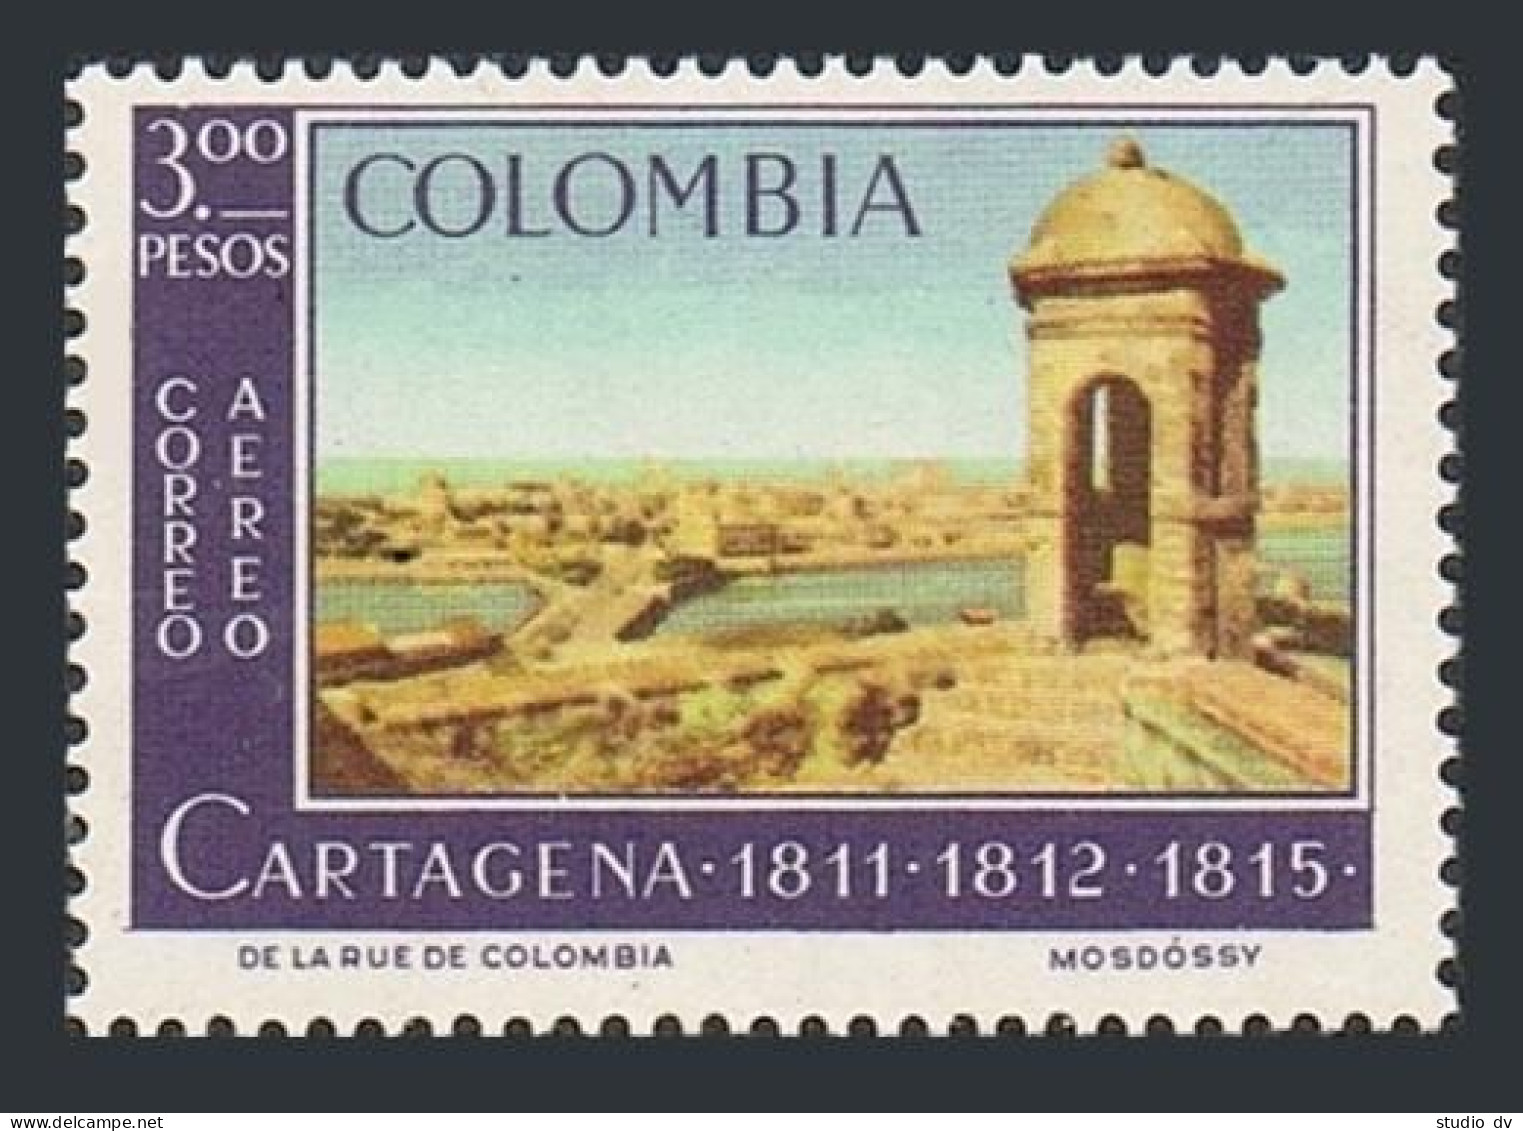 Colombia C461,MNH.Michel 1054. Cartagena's Independence In 1811.1964. - Colombia